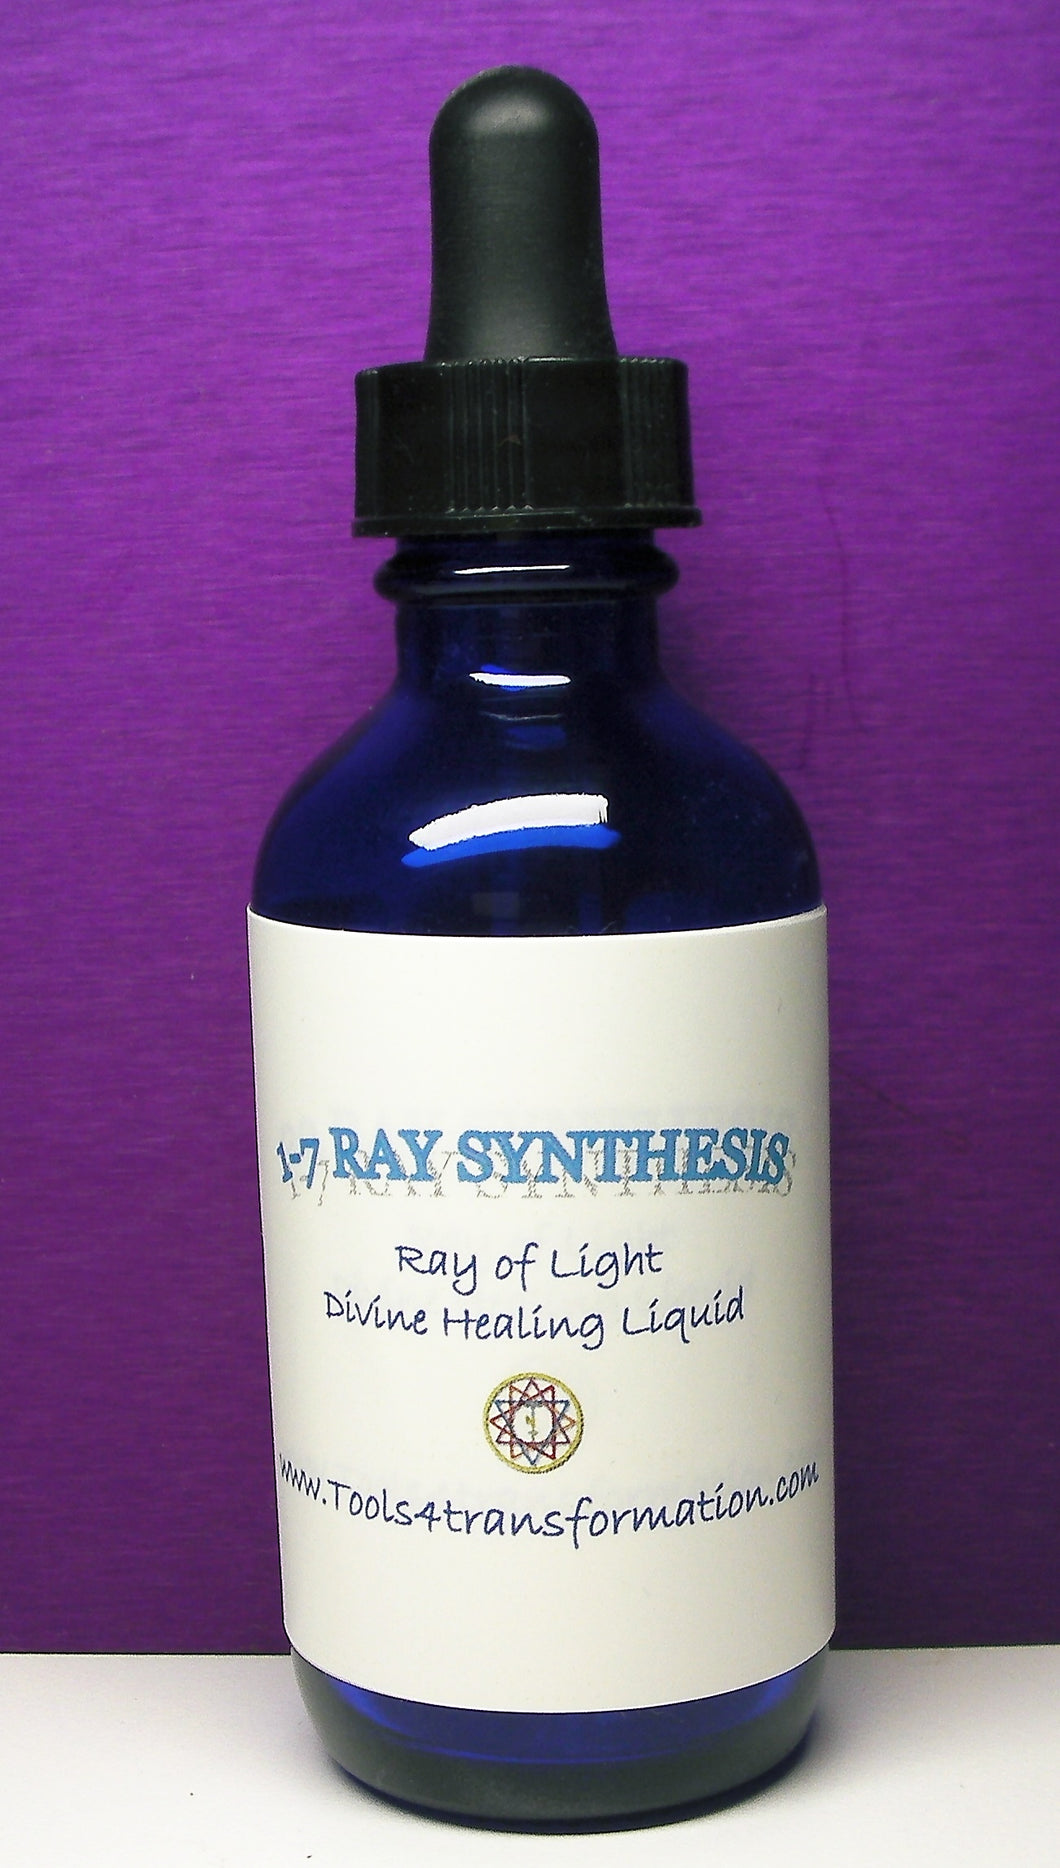 1-7 Ray (Synthesis) Essence